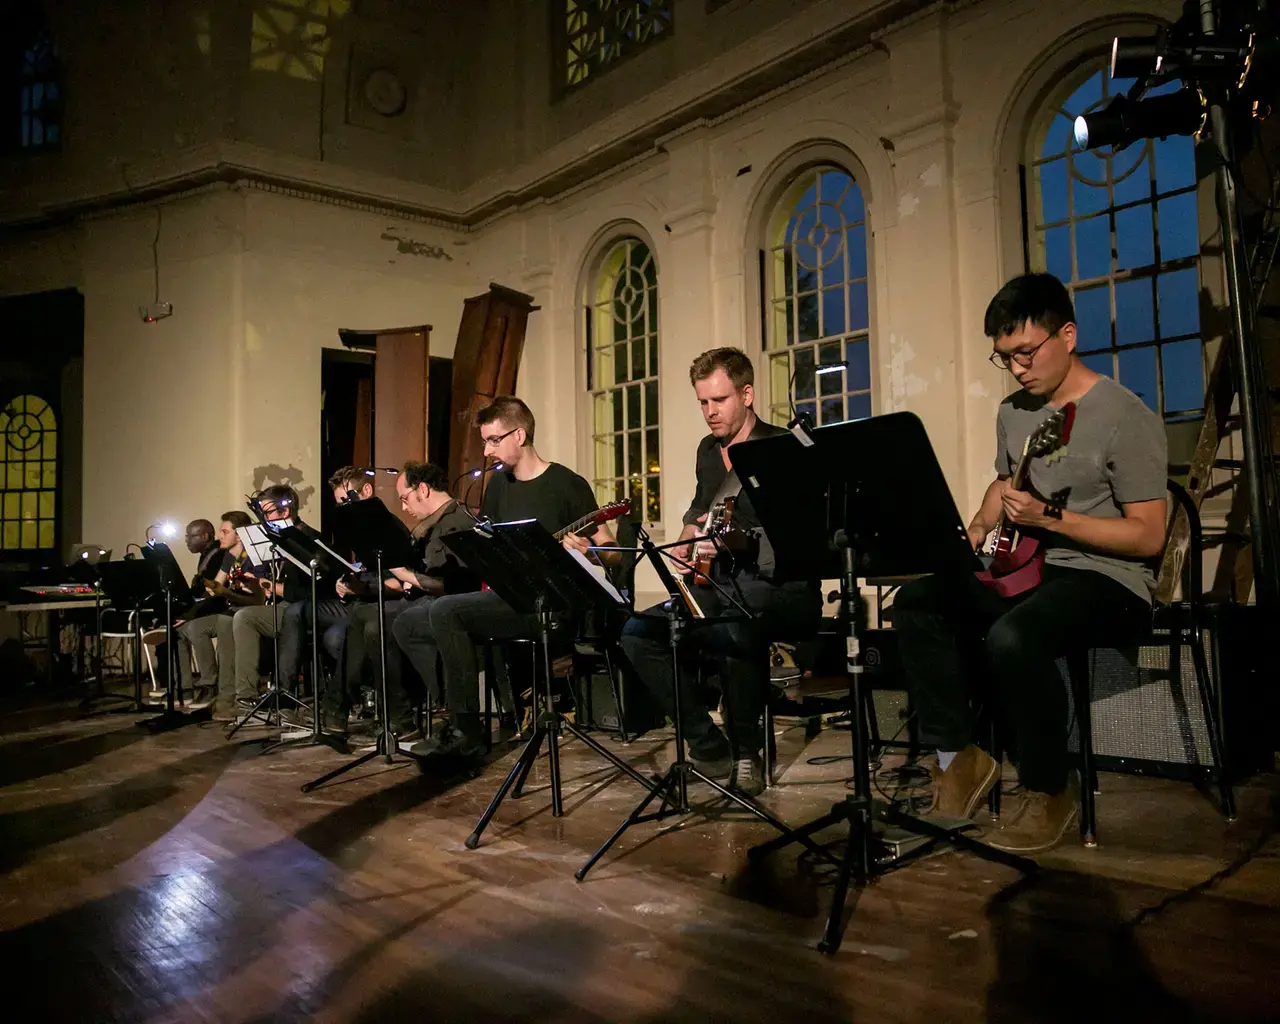 Sonors Guitar Ensemble in concert for That Which Is Fundamental, 2016. Photo by Ben Tran, courtesy of Bowerbird.